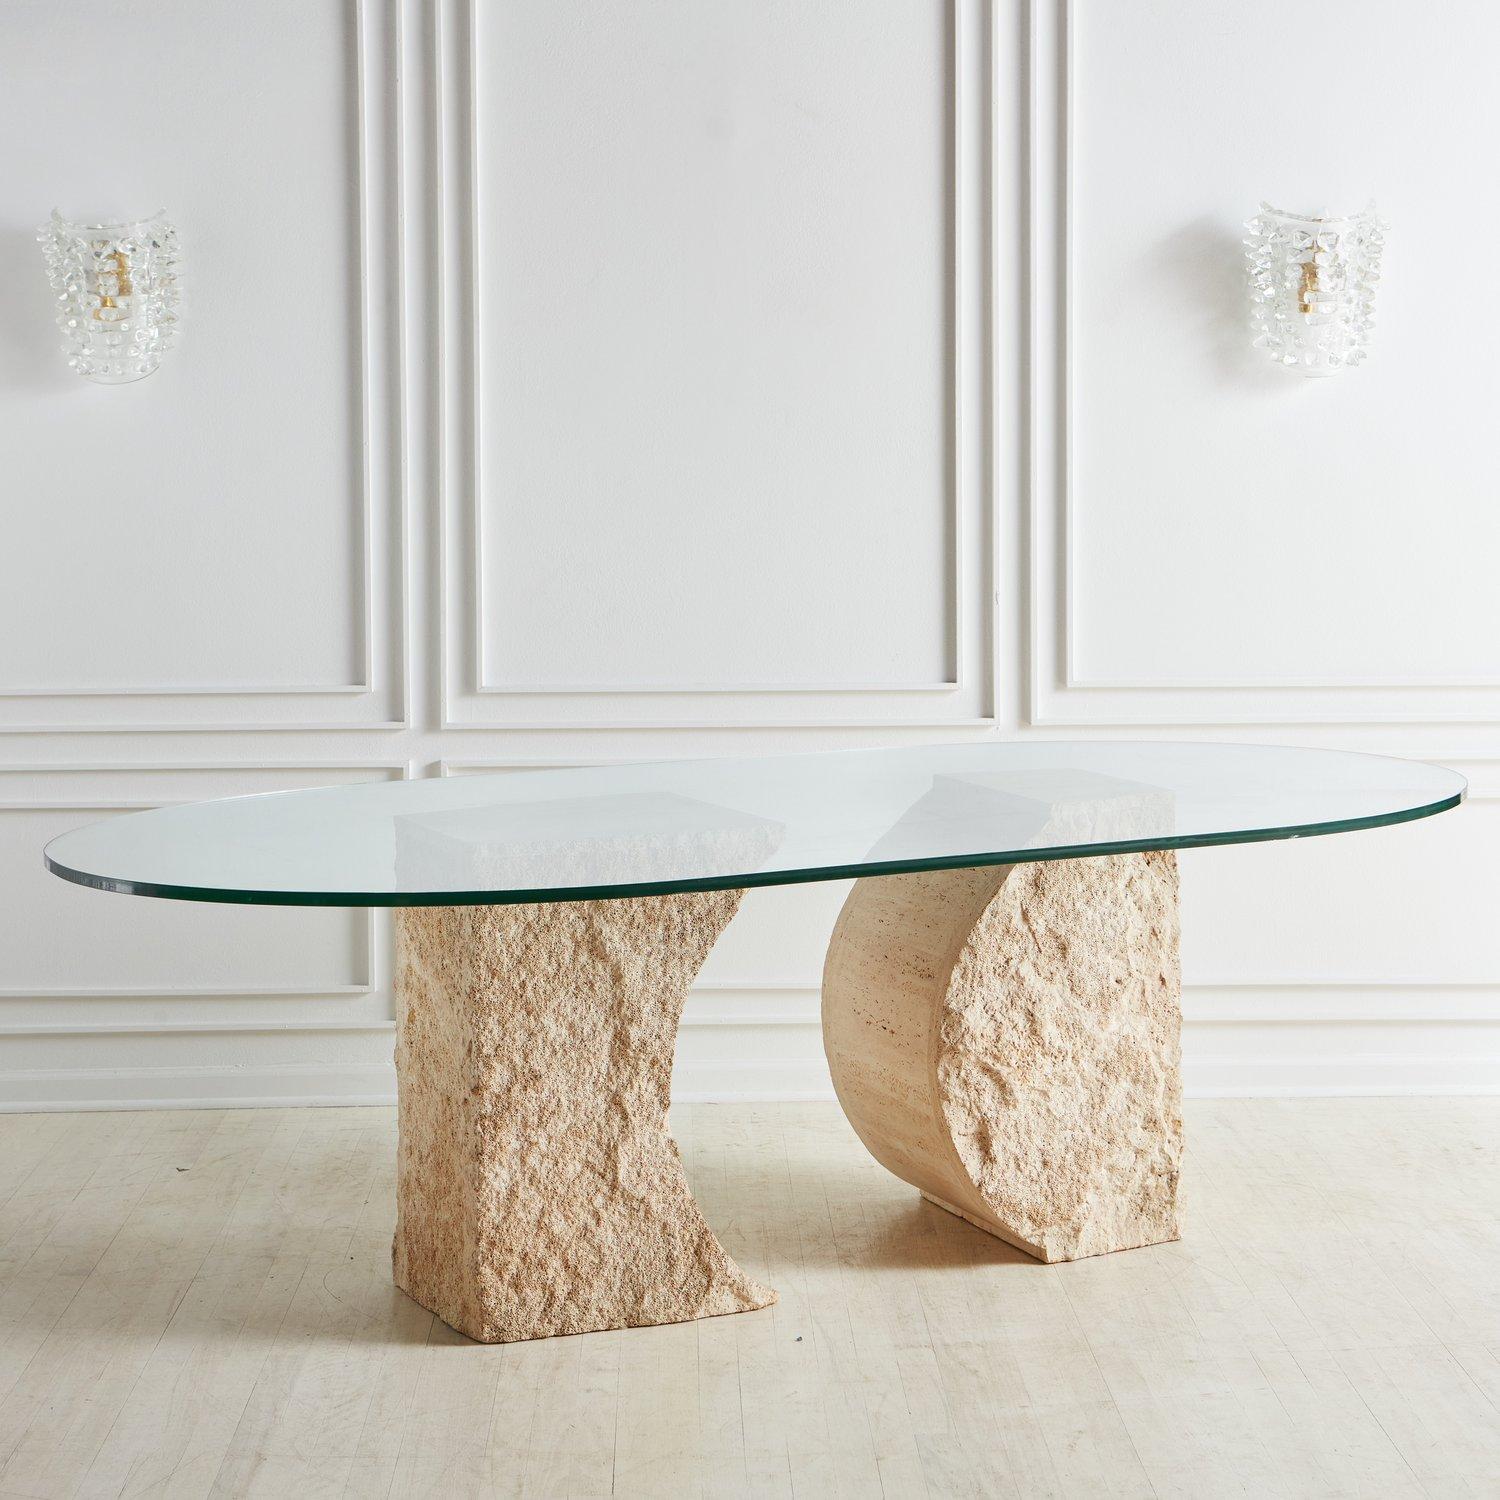 A beautiful dining table designed by Willy Rizzo in 1975. The base of this table consists of two carved solid travertine blocks with porous, textural details. The base supports a large. 75” thick oval table top. Signed ‘Willy Rizzo’ at the base of